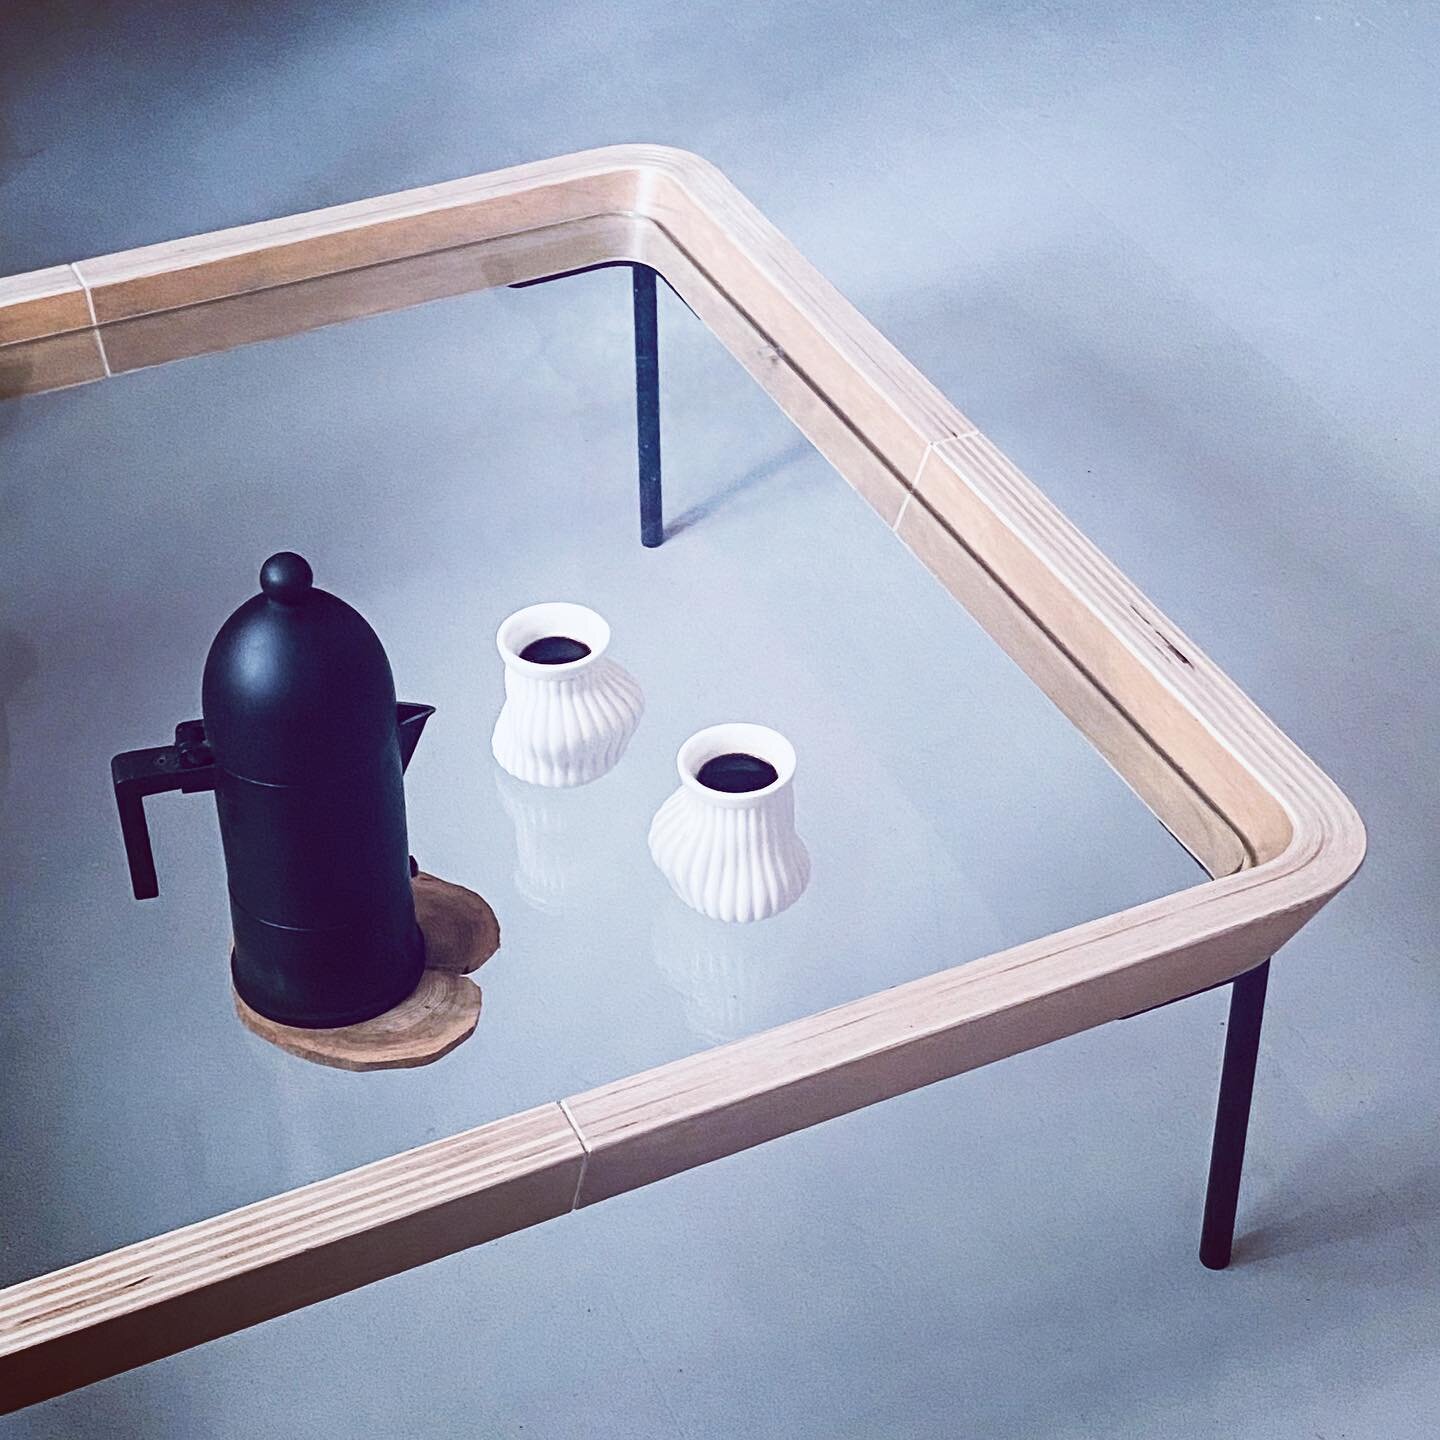 JP glass top table accompanied with Alessi La Cupola by Aldo Rossi and Supple Cups by Greg Lynn. The birch plywood furniture frame pressed at Piiroinen. Frame components cut and joined by the designer. 
.
.
.
#jessexpietilaxstudio 
#alessi 
#aldoross